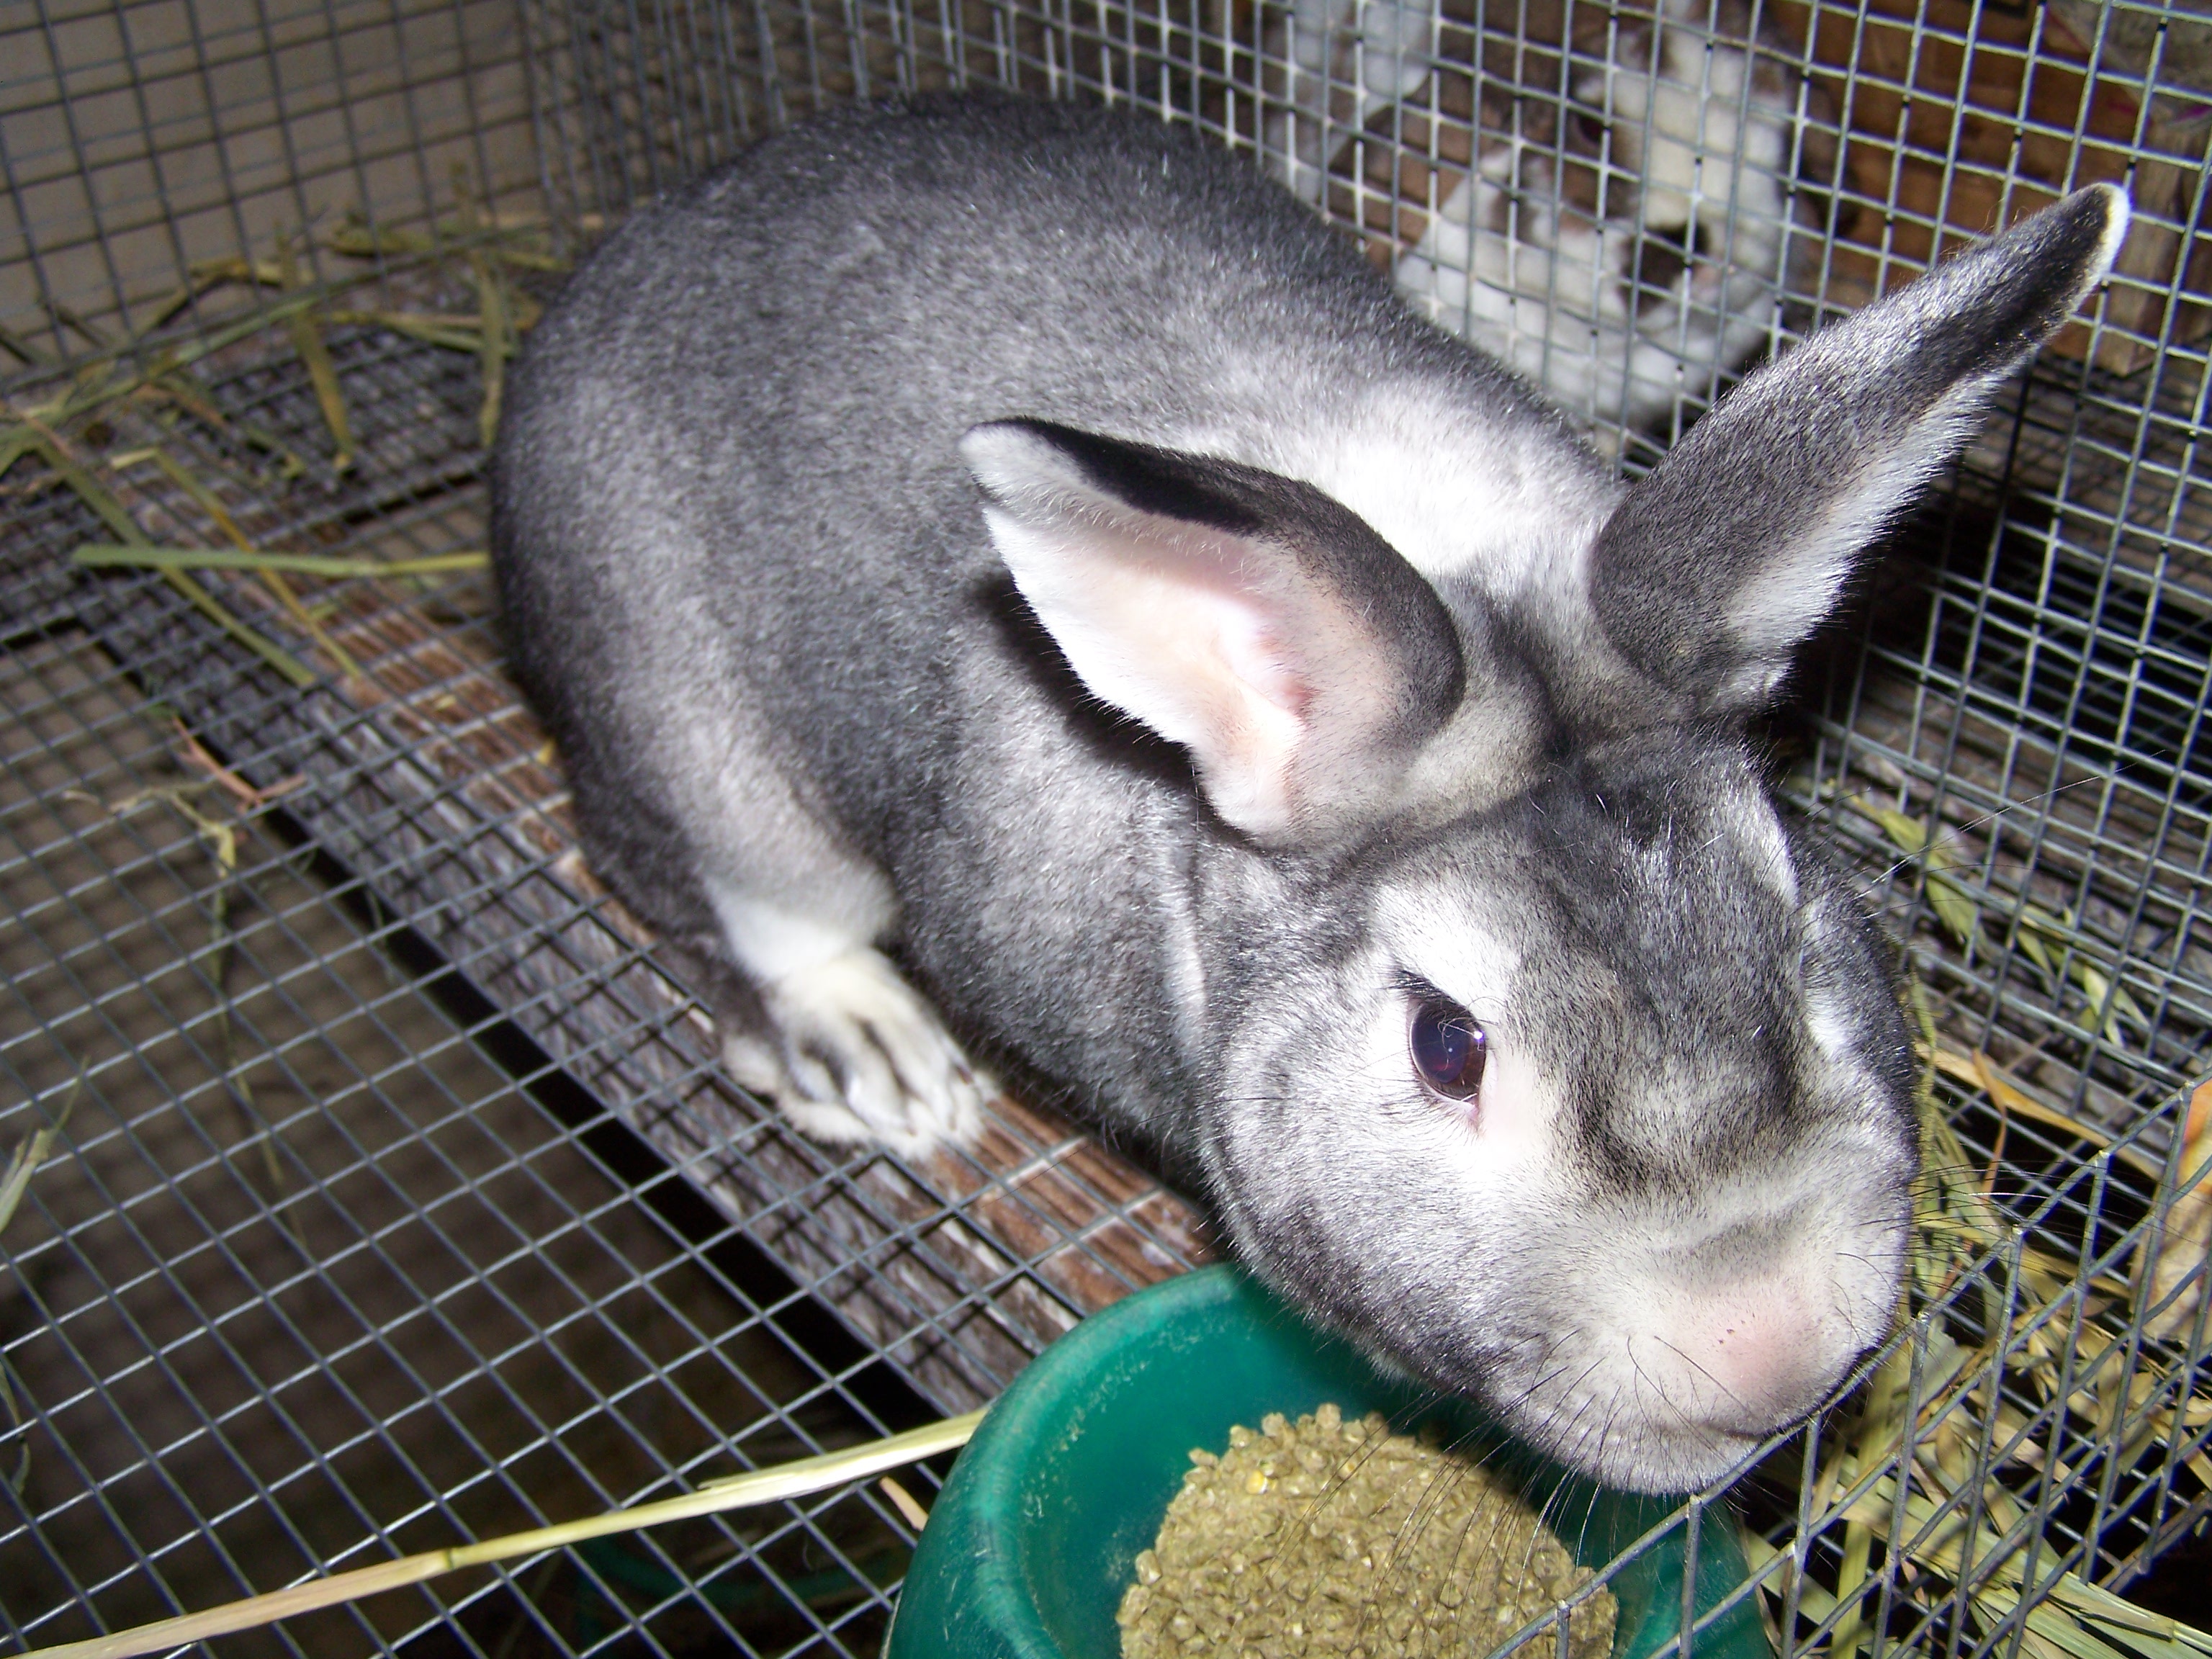 Other Rabbits